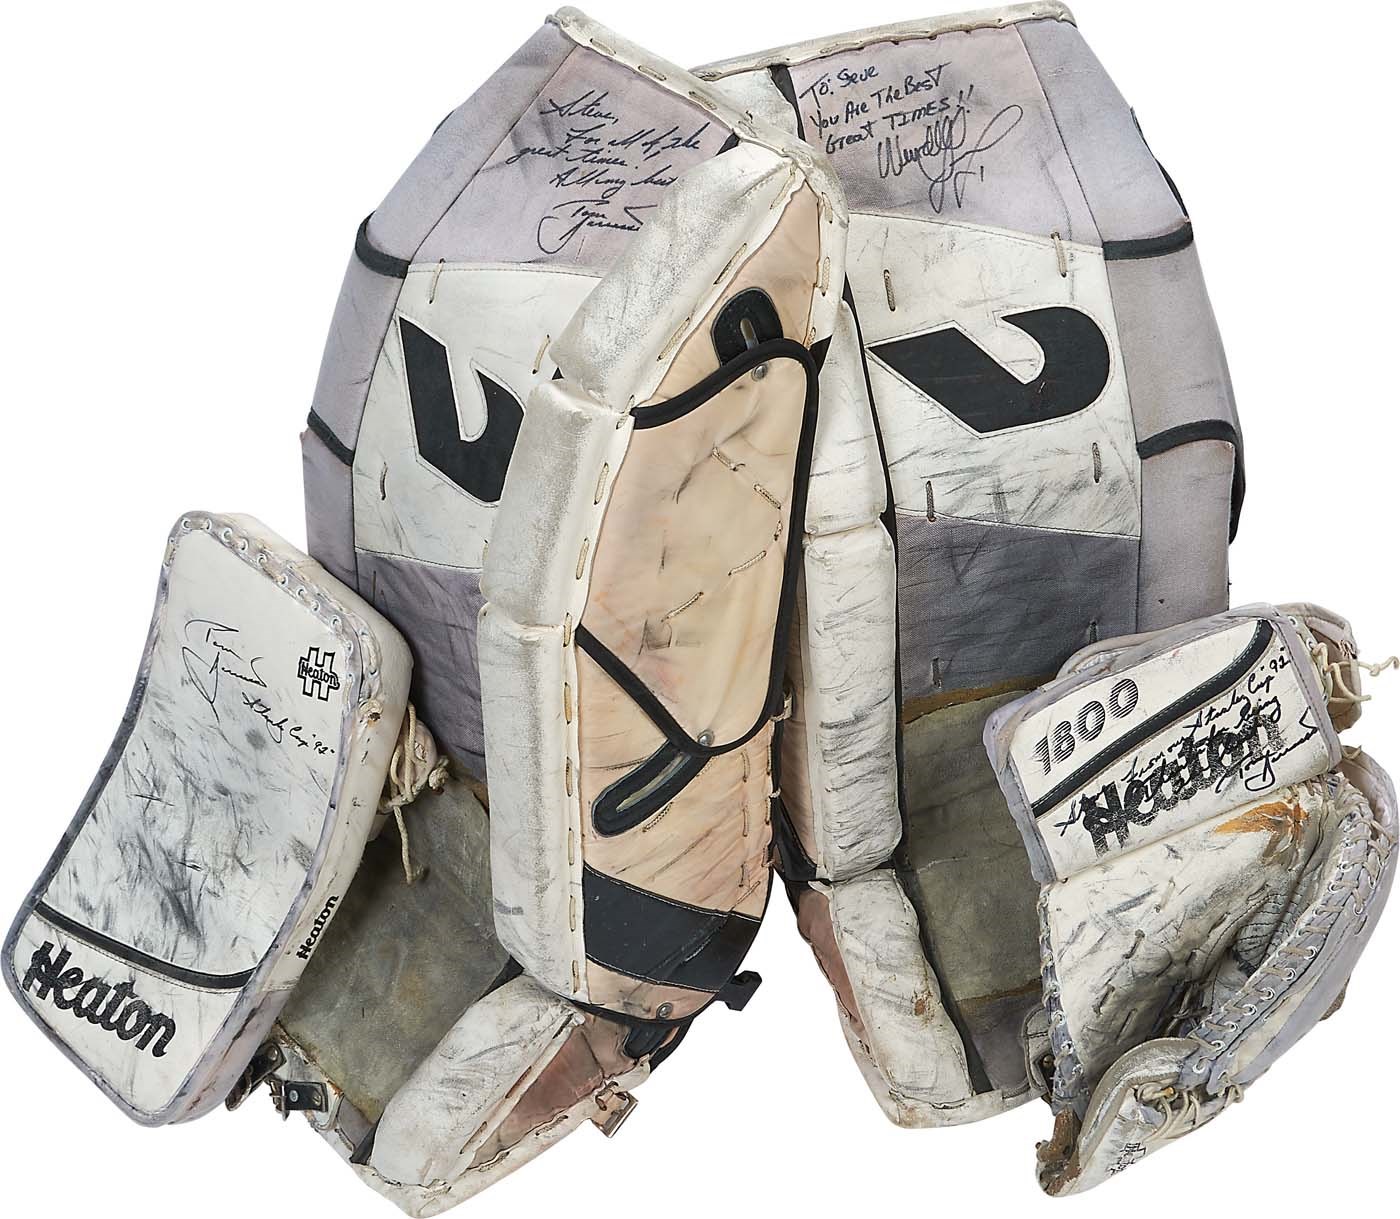 - 1992 Tom Barrasso Stanley Cup Finals Game Worn Catcher, Blocker and Leg Pads (Photo-Matched)